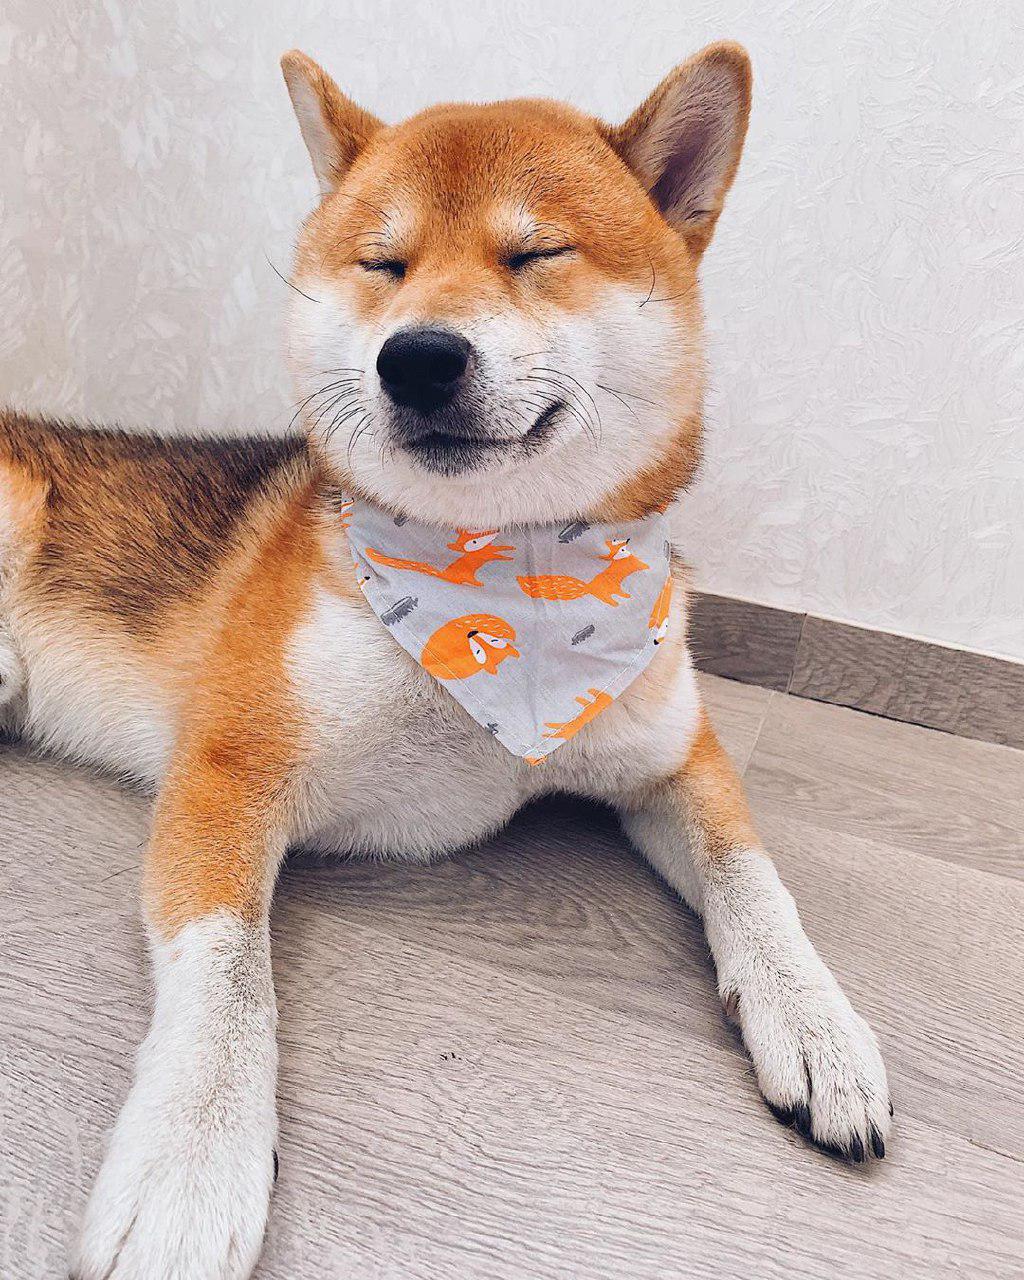 14 Photos That Confirm That Shiba Inu is the Most Smiling Dog | Page 2 ...